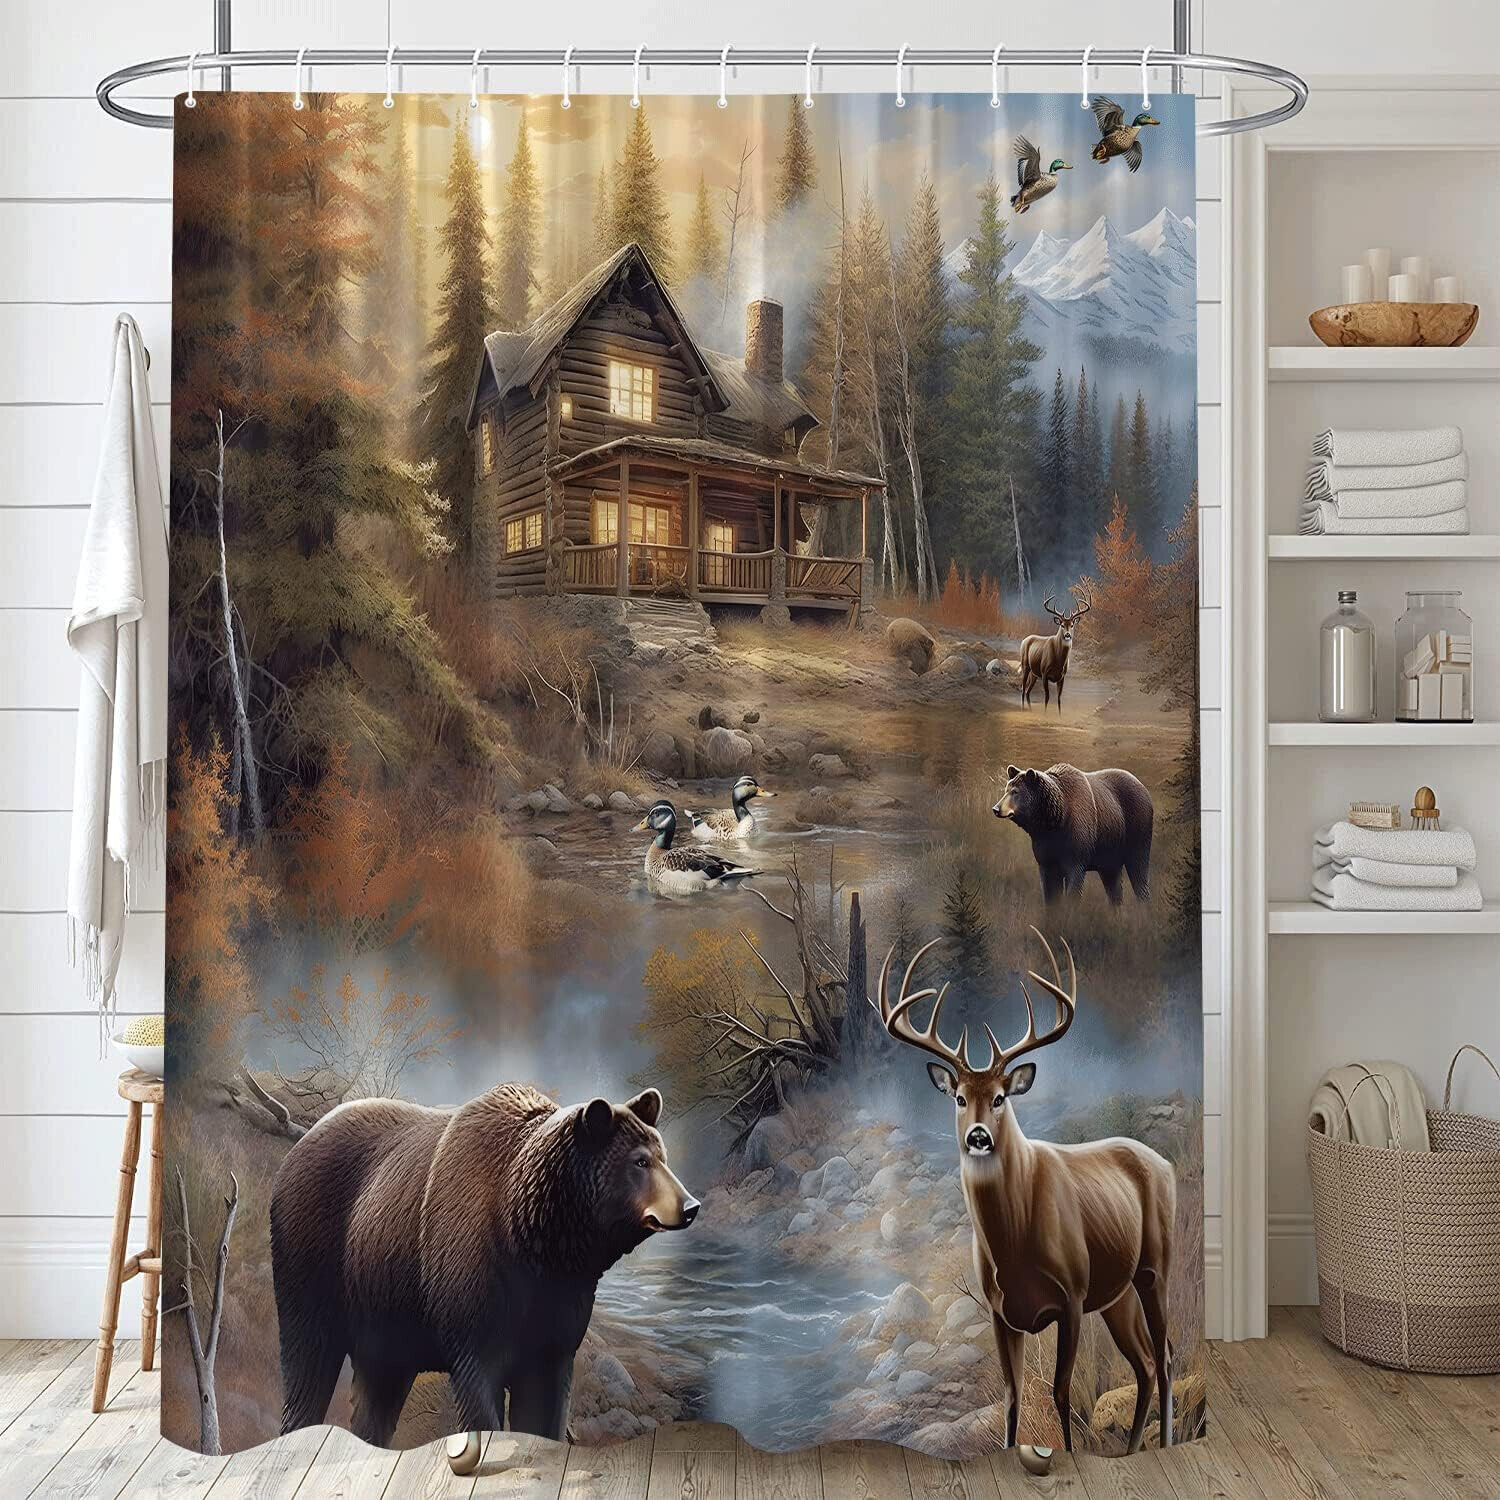 Primary image for Cabin Lodge Bear Deer Country Forest Fabric Shower Curtain, Modern Rustic,70"x70